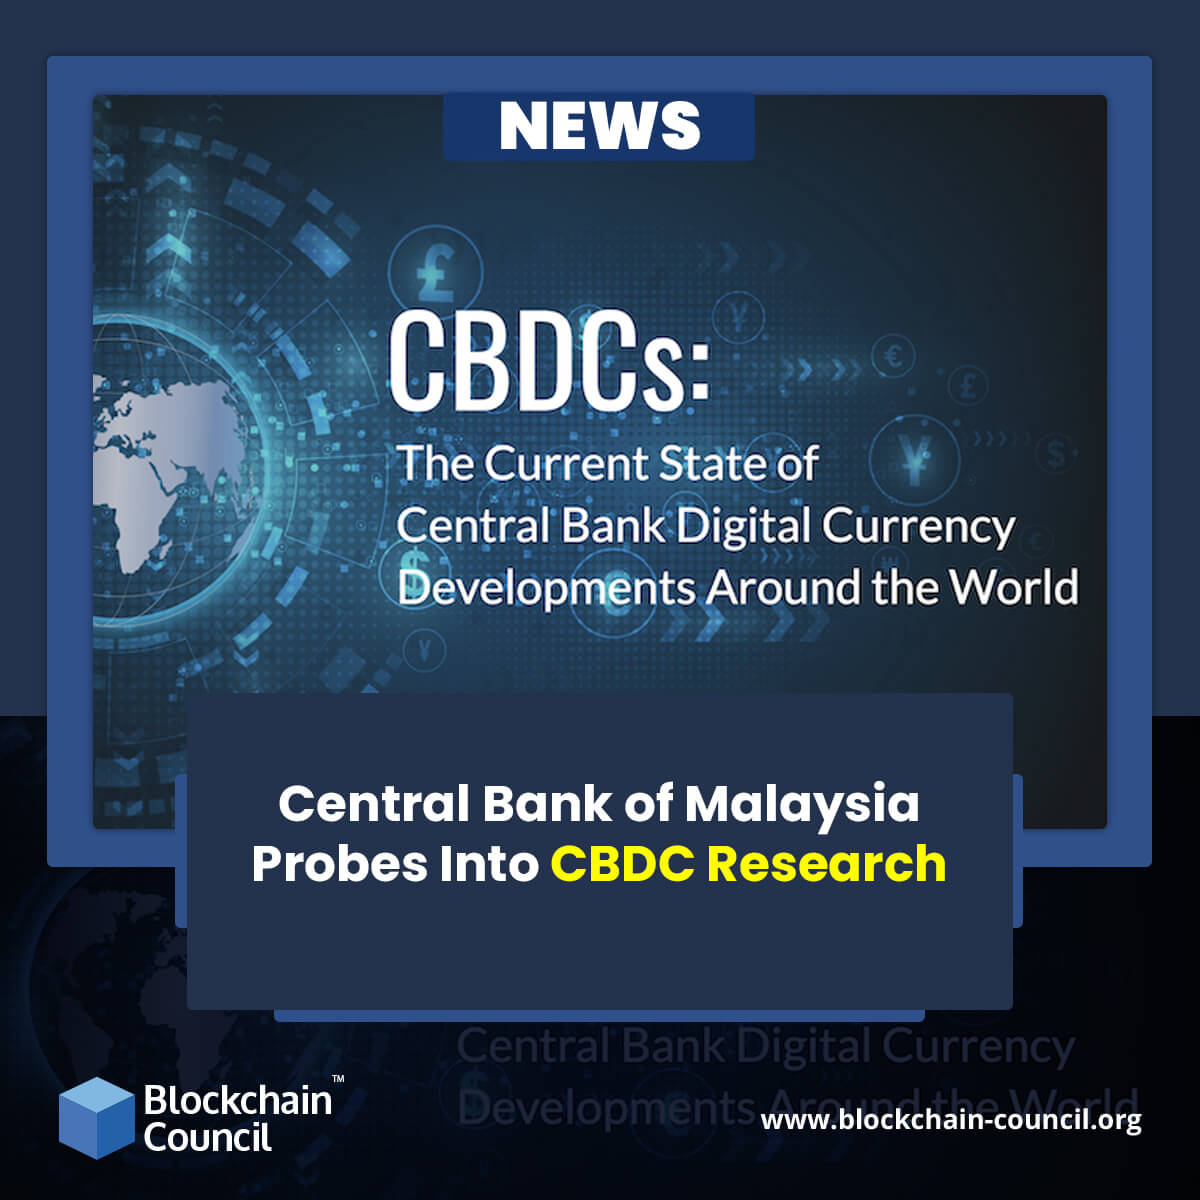 Central Bank of Malaysia Probes Into CBDC Research